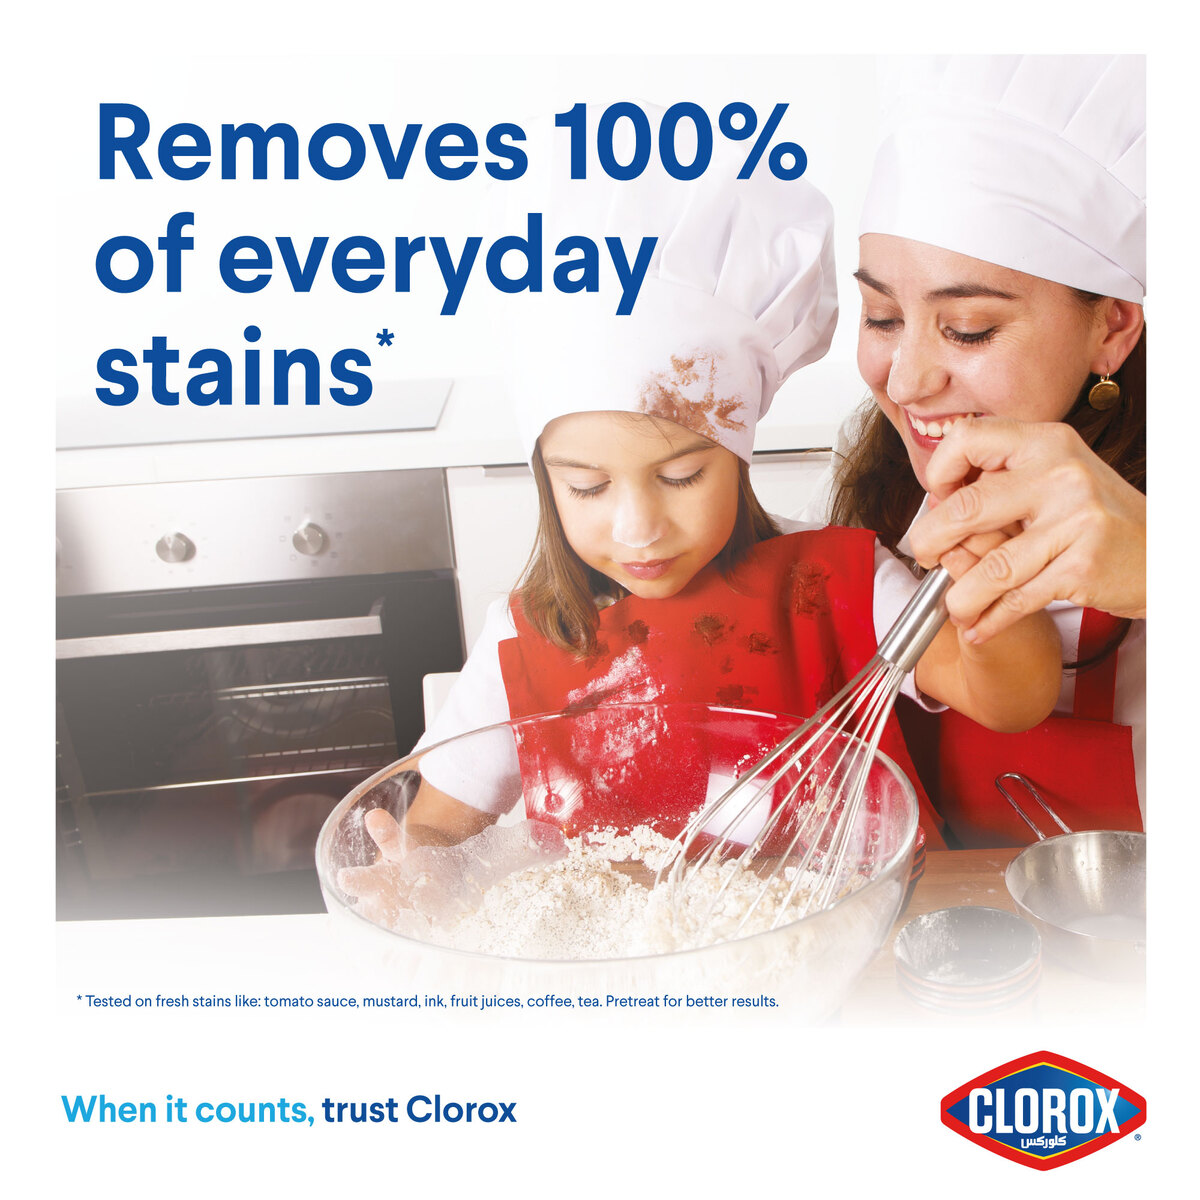 Clorox Liquid Stain Remover & Color Booster For White Clothes 1.8 Litres